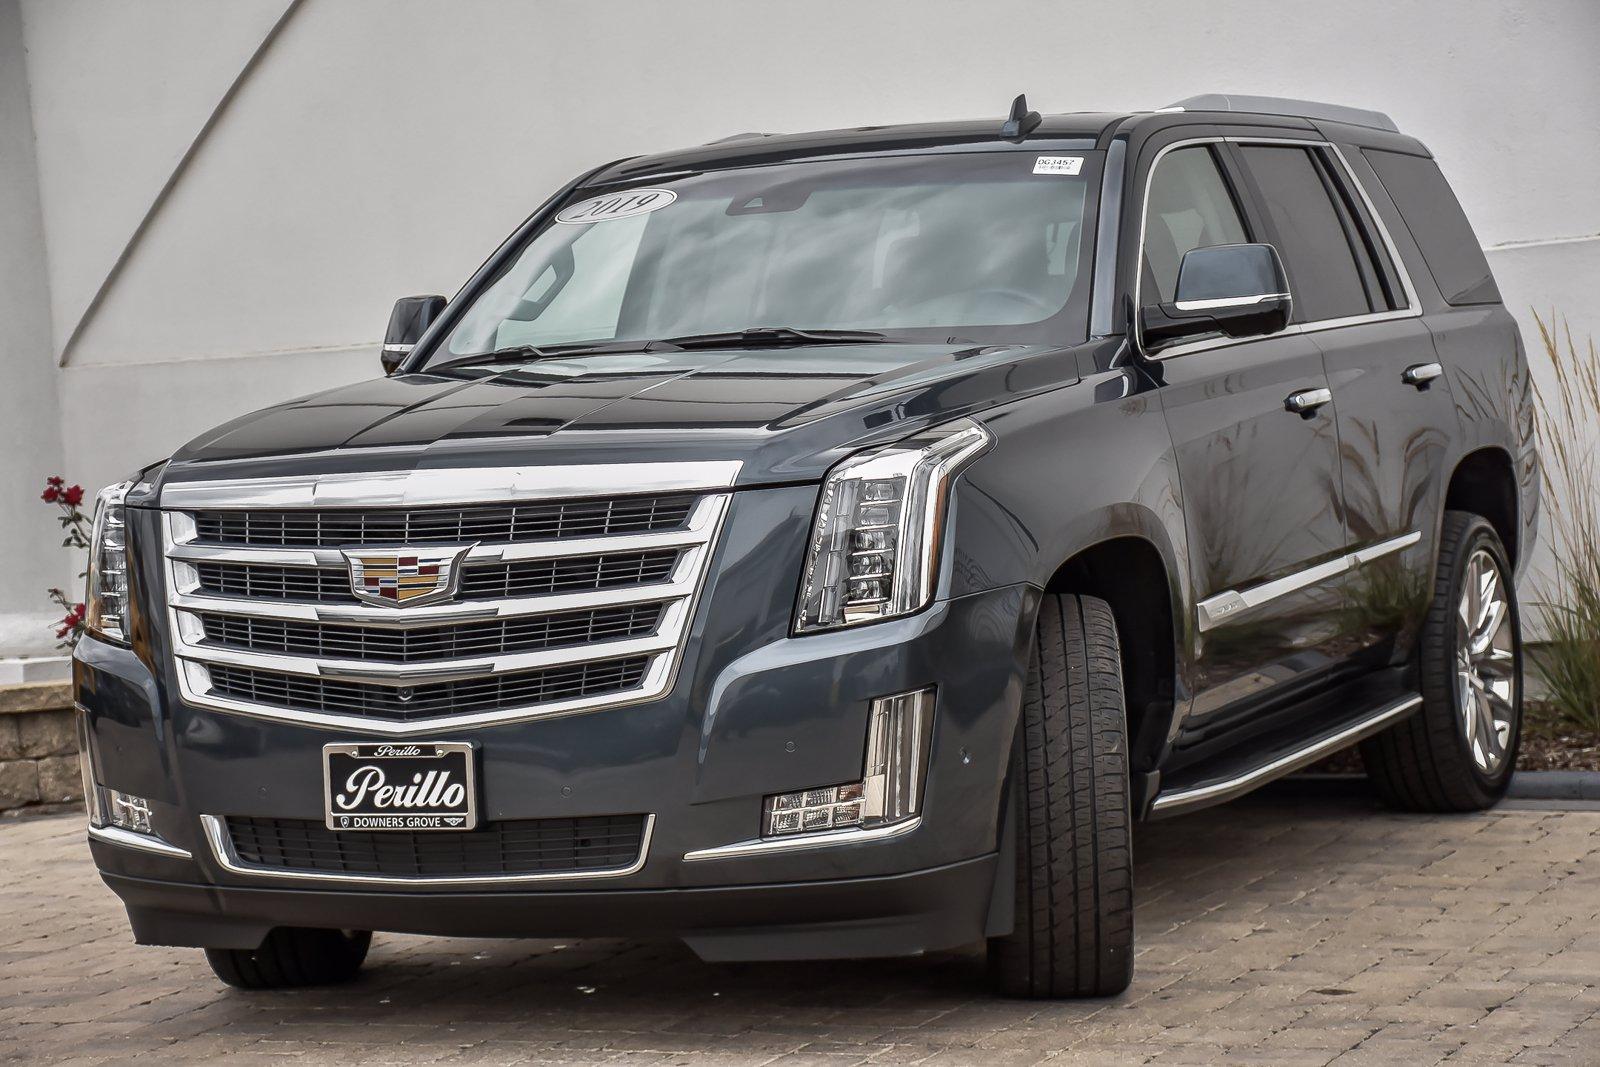 Used 2019 Cadillac Escalade Luxury, 3rd Row, | Downers Grove, IL